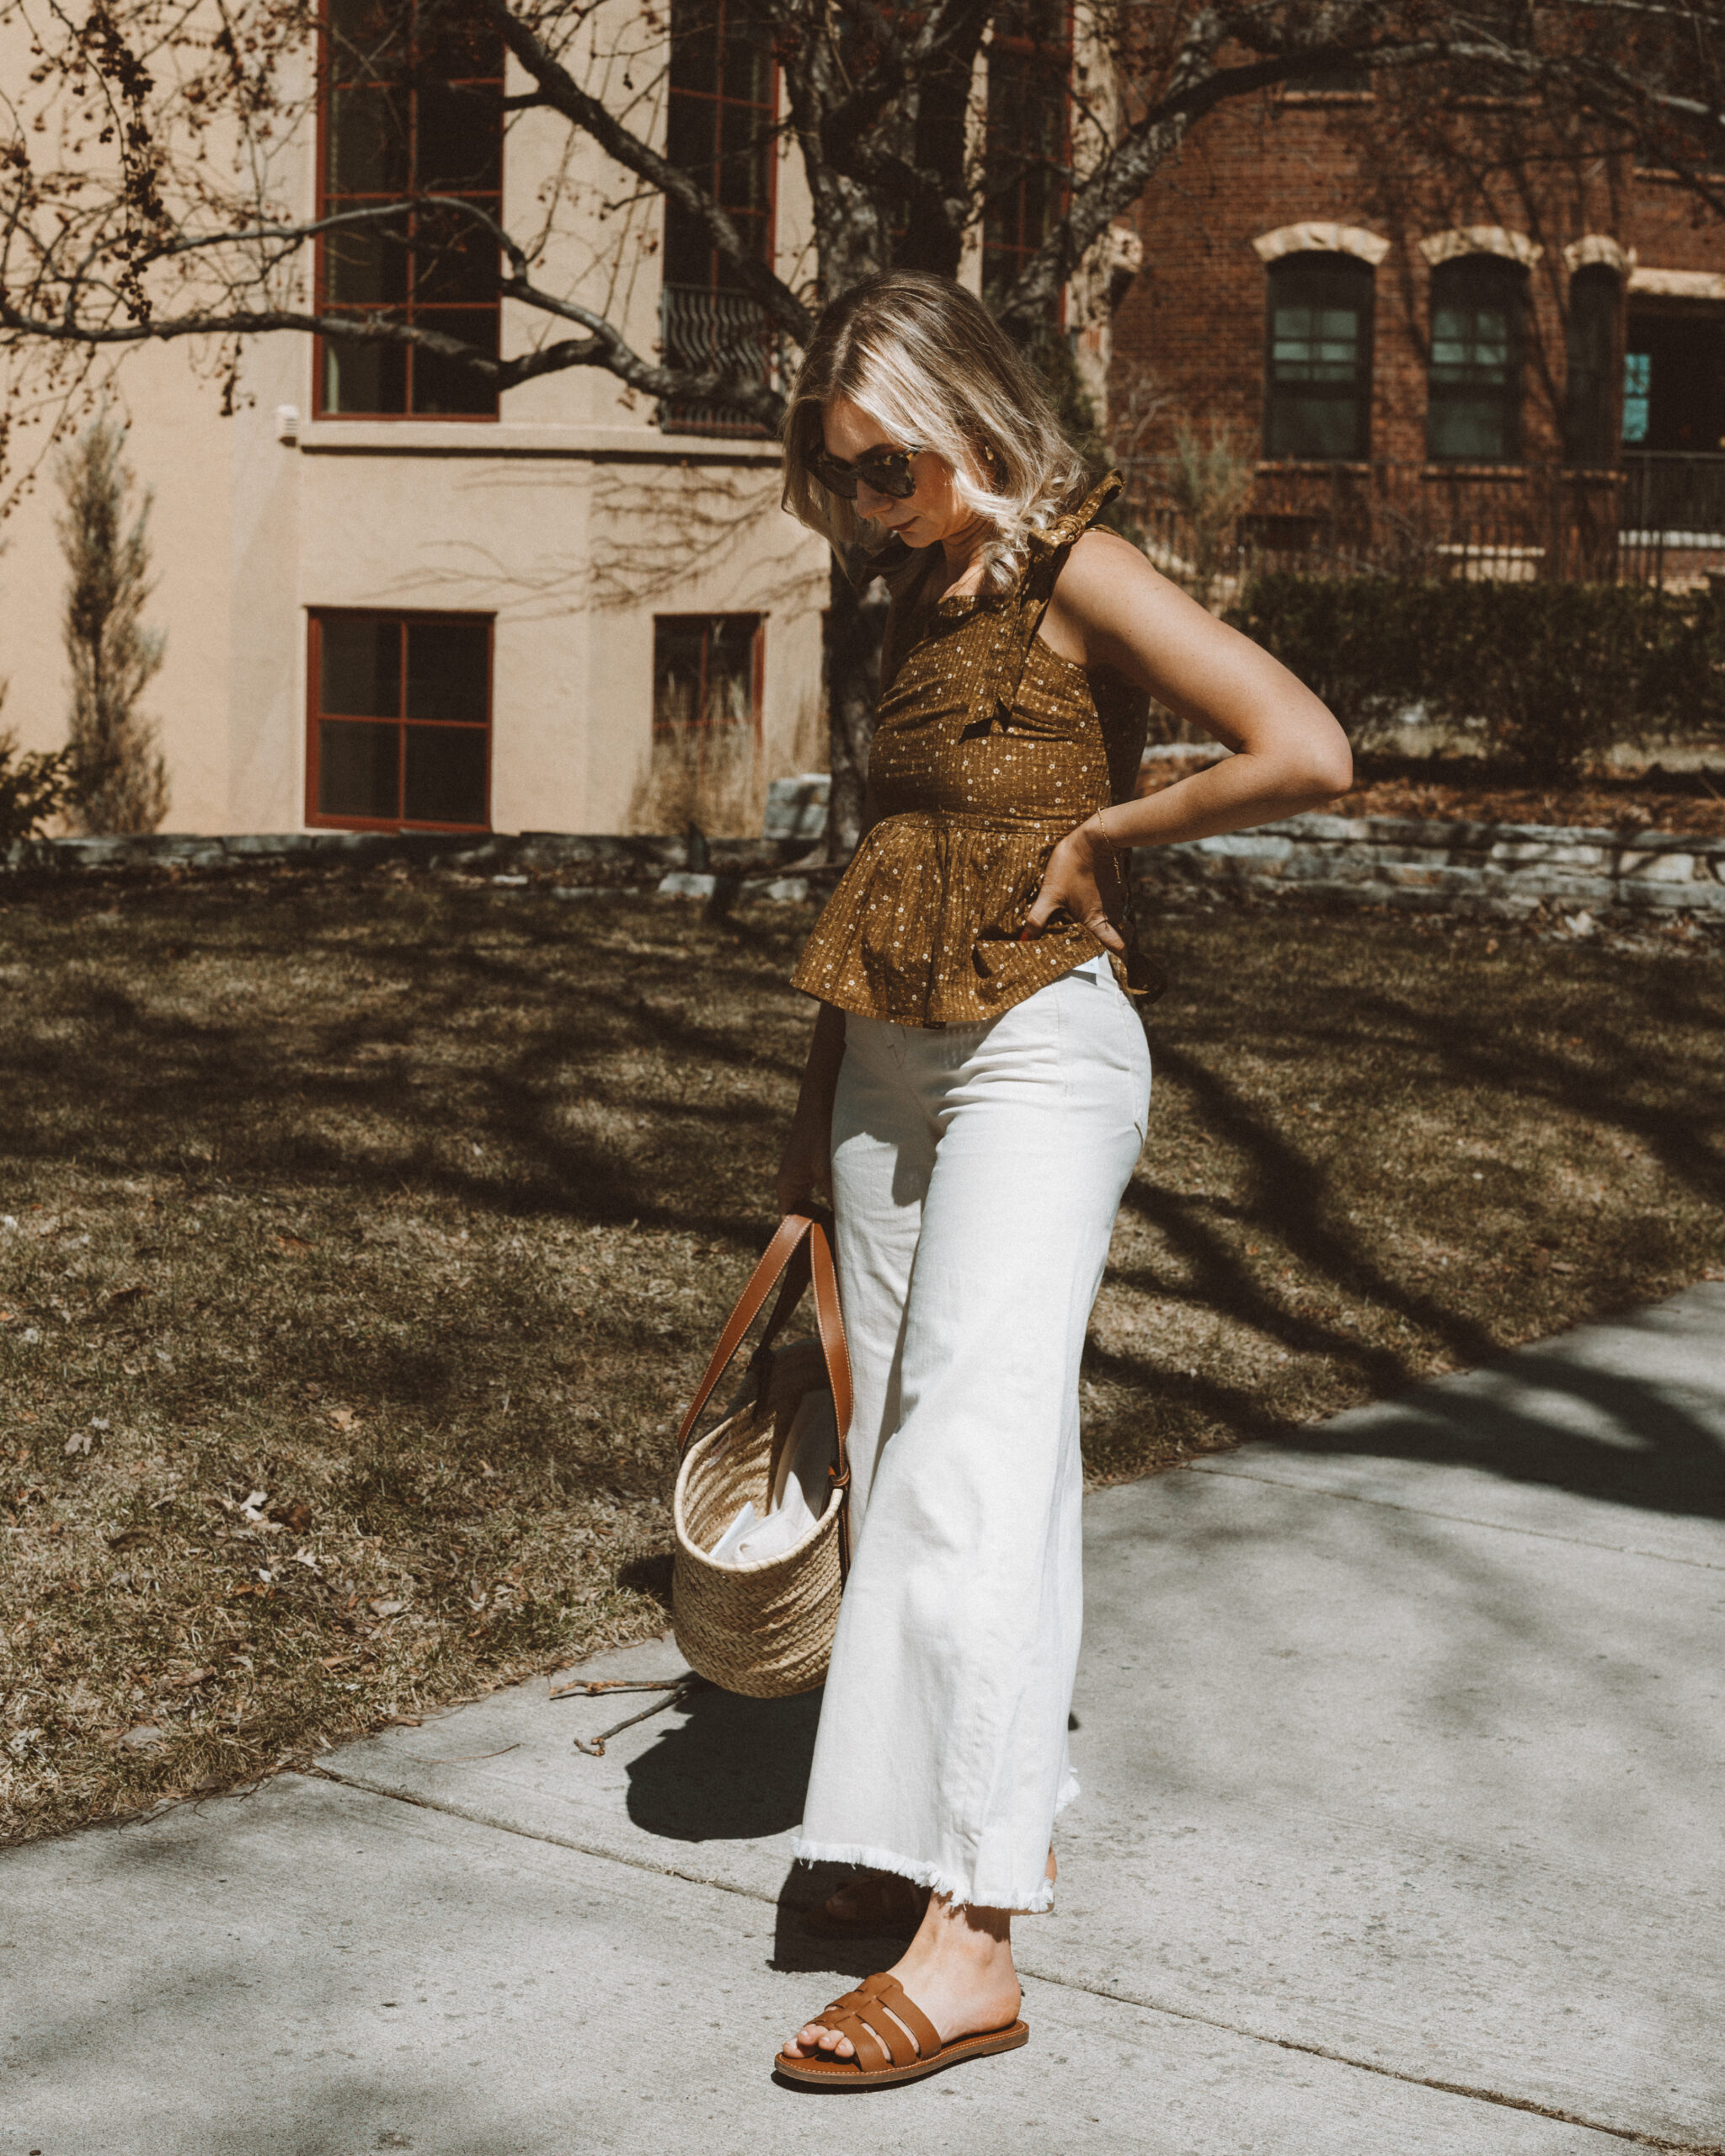 Karin Emily wears a peplum top from Madewell, a pair of wide leg jeans from AYR, a Poolside Basket Bag and a pair of Fisherman sandal slides from Madewell